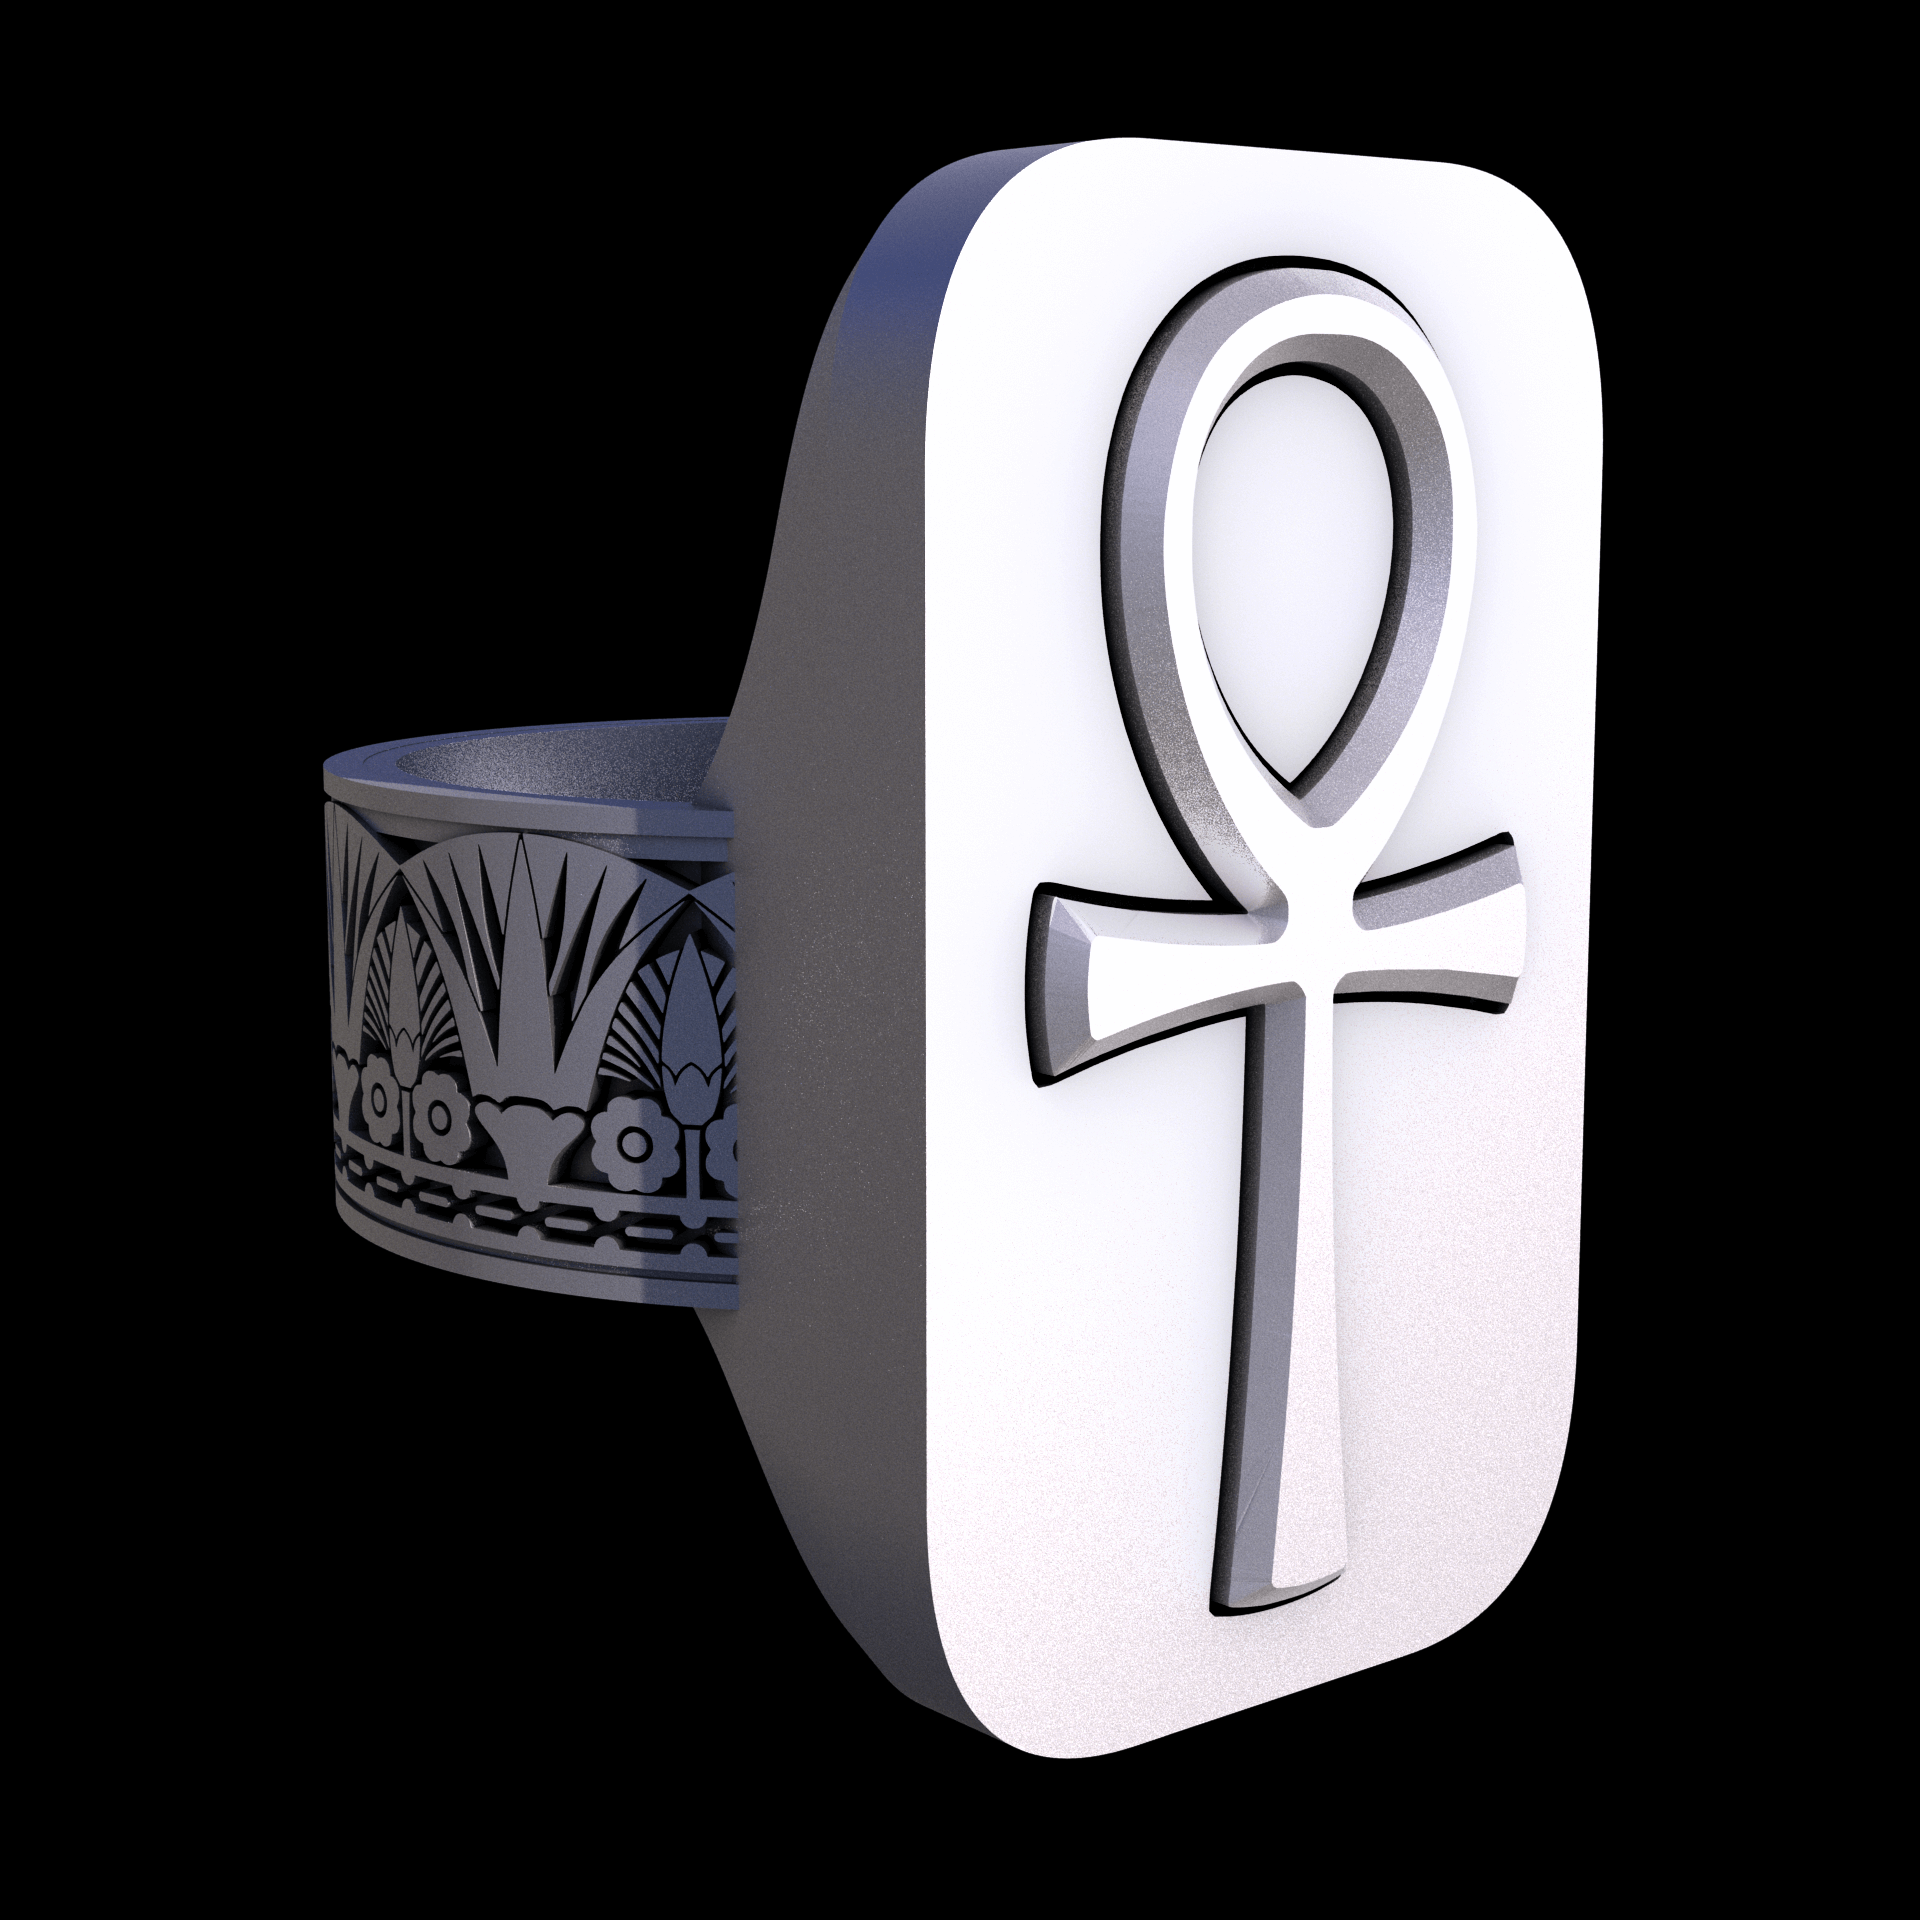 Stainless Steel 17-4PH, manufactured using 3D printing, and media blasted after sintering, for a semi matte, rough surface finish.